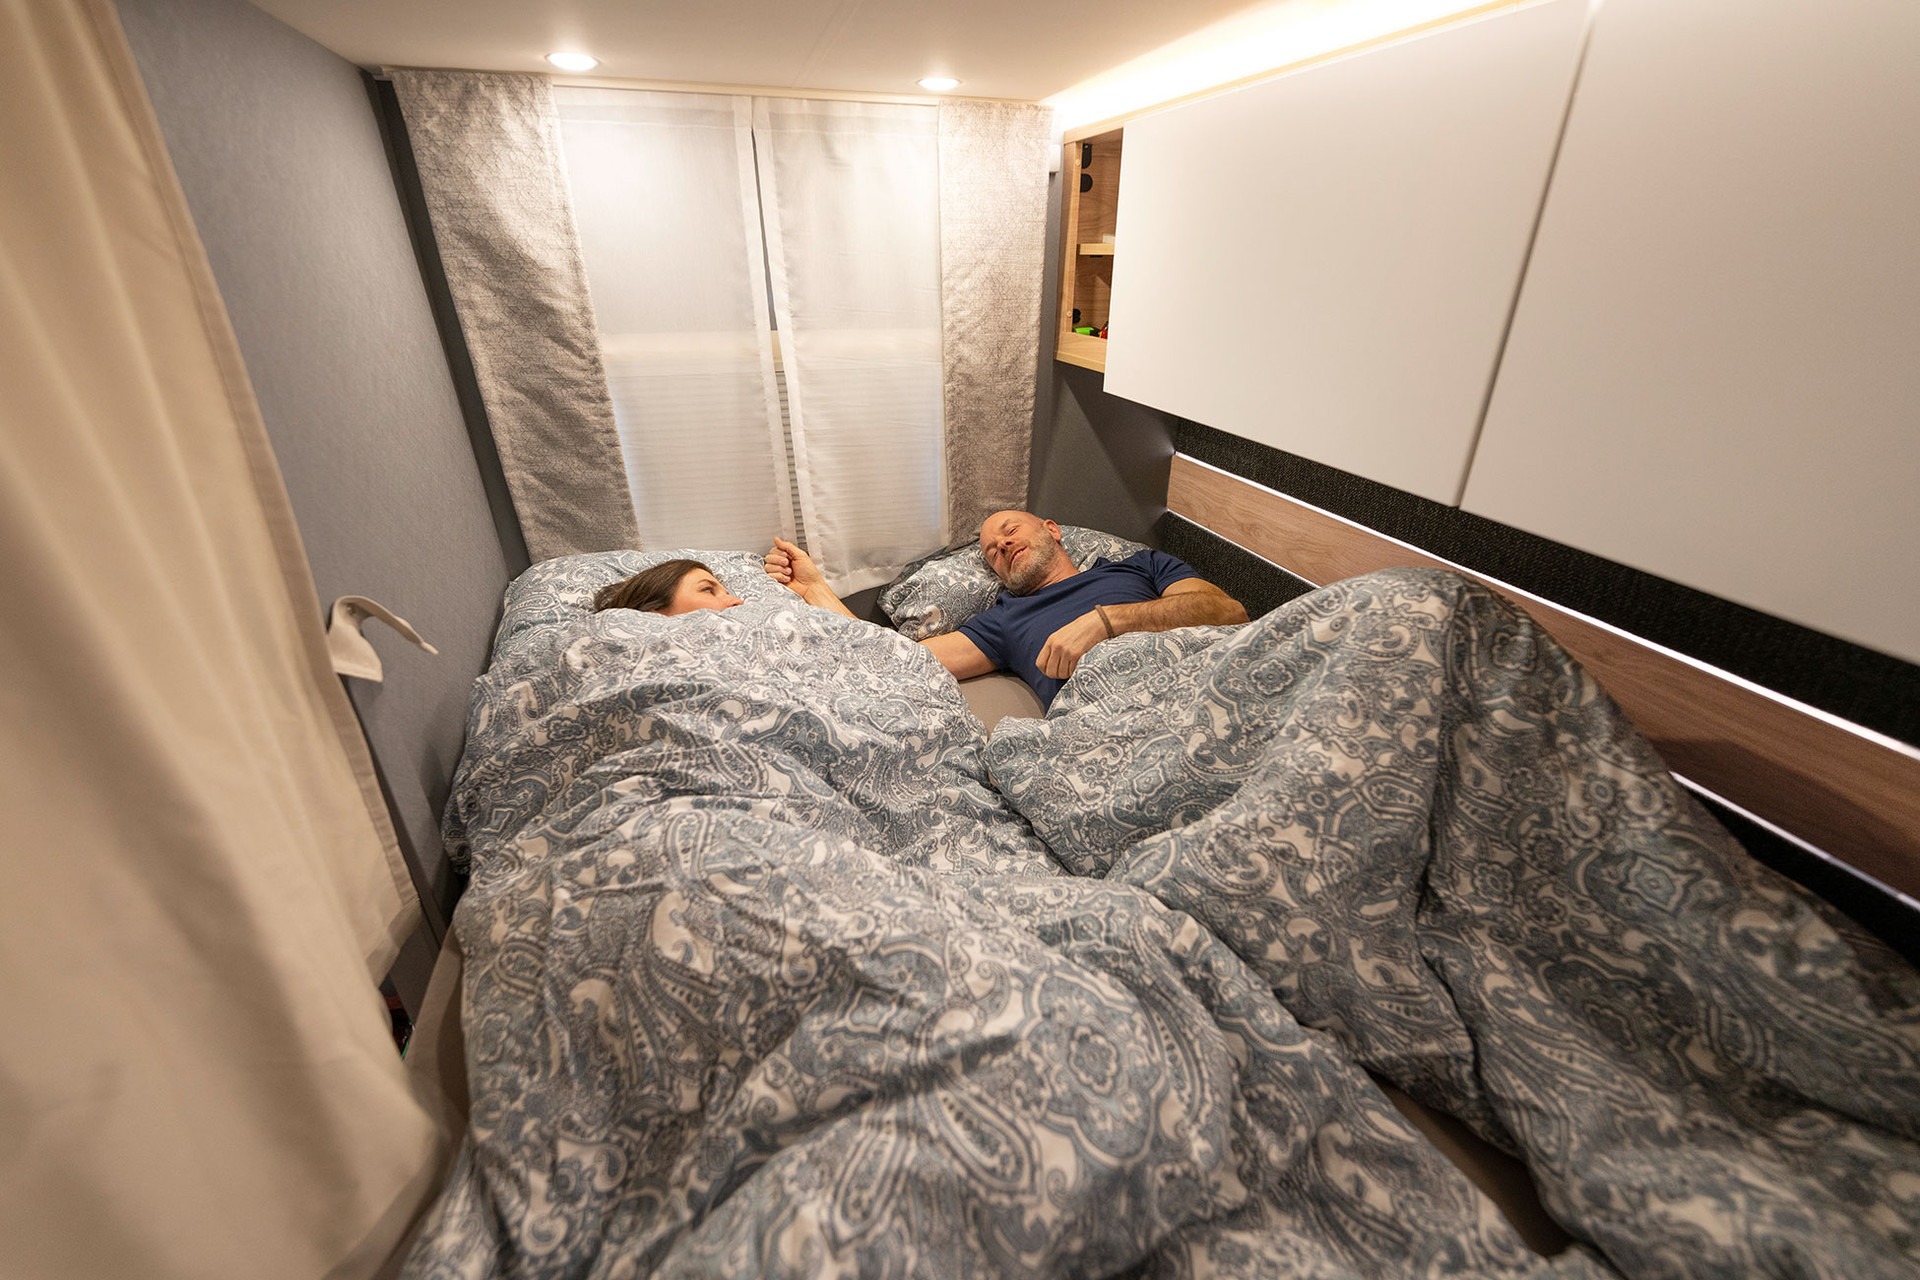 A bedroom to dream of – with a 211 x 152 cm sleeping area, two windows for good ventilation and large overhead lockers for linen. Storage nets installed under the overhead lockers allow quick access to items needed during the night. A 230 V socket and two USB charging ports make it easy to keep mobile phones and other devices charged.